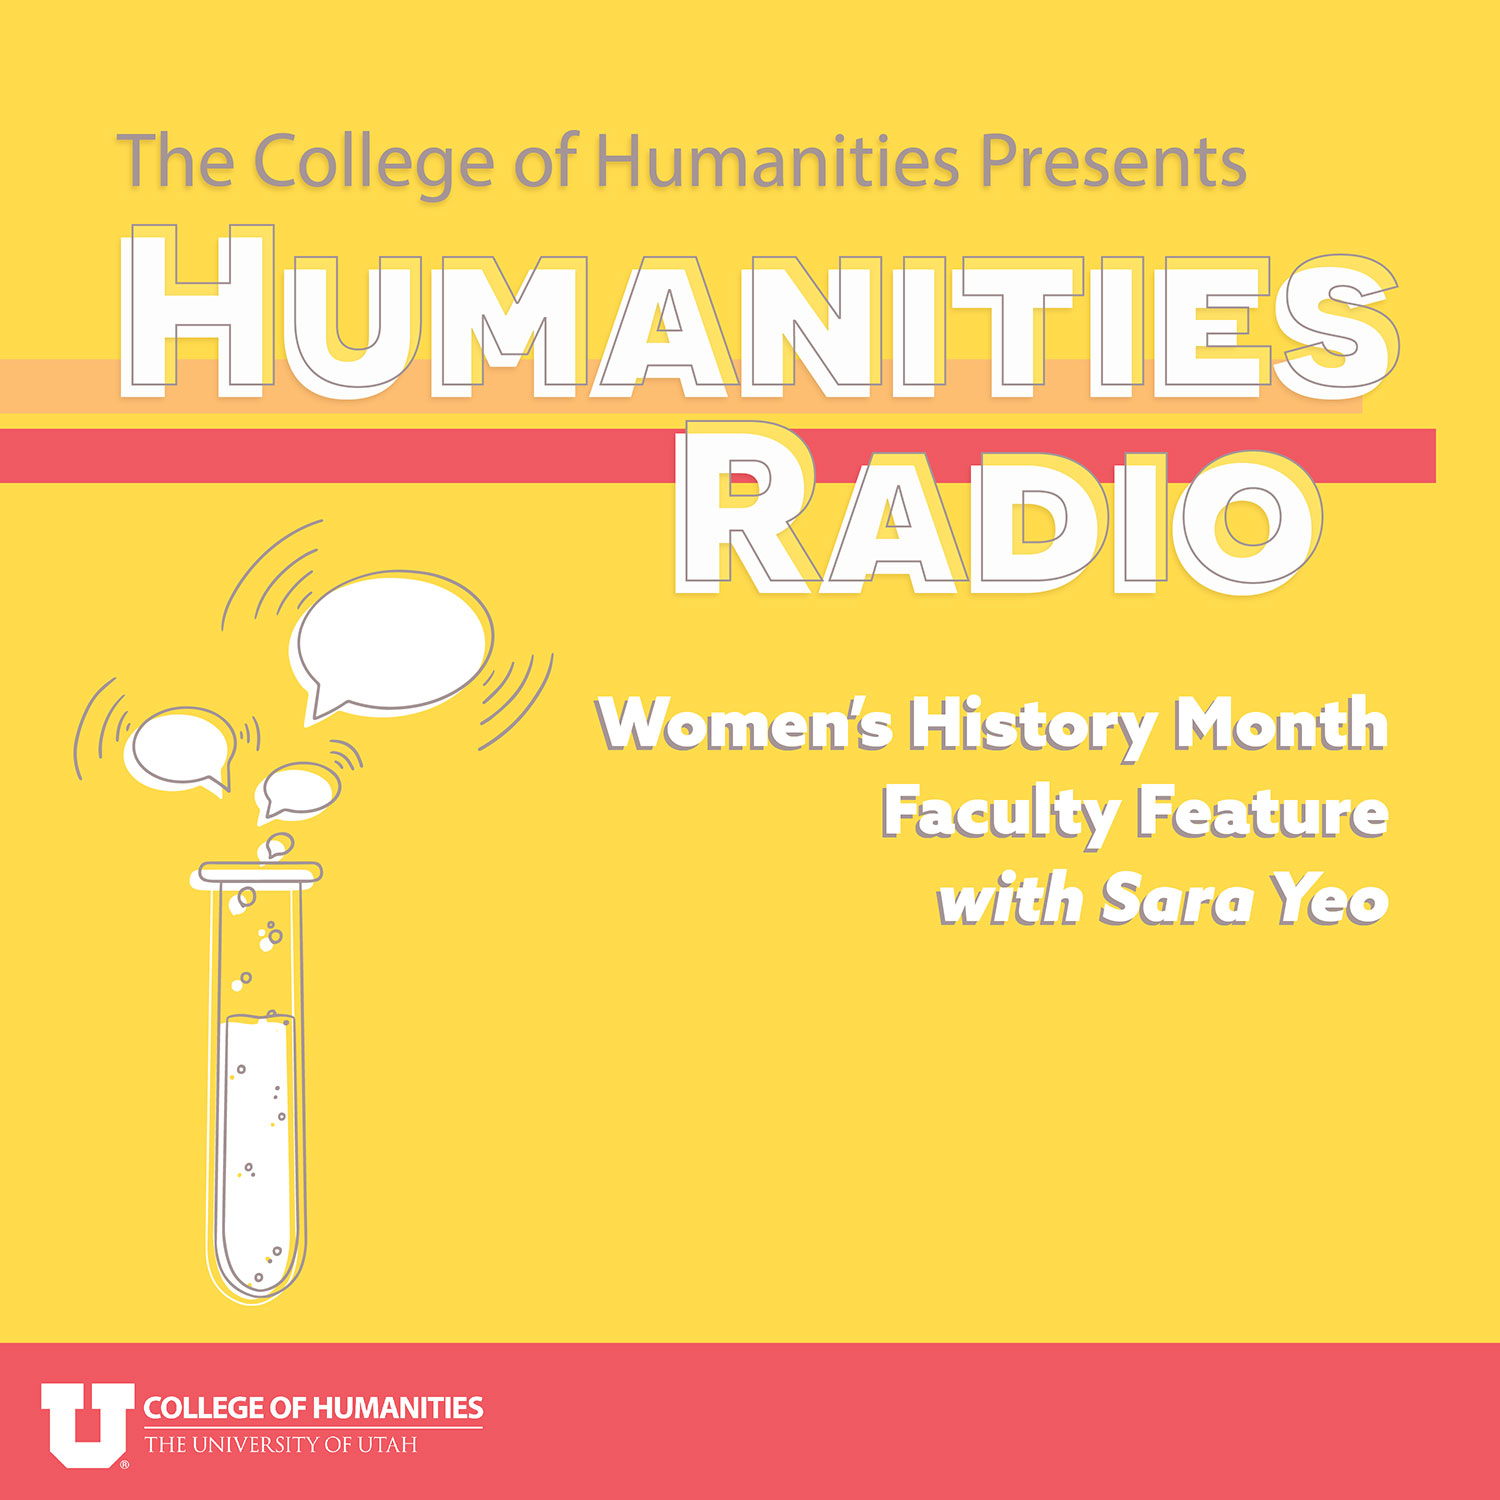 Episode 13: Women's History Month Faculty Feature with Sara Yeo